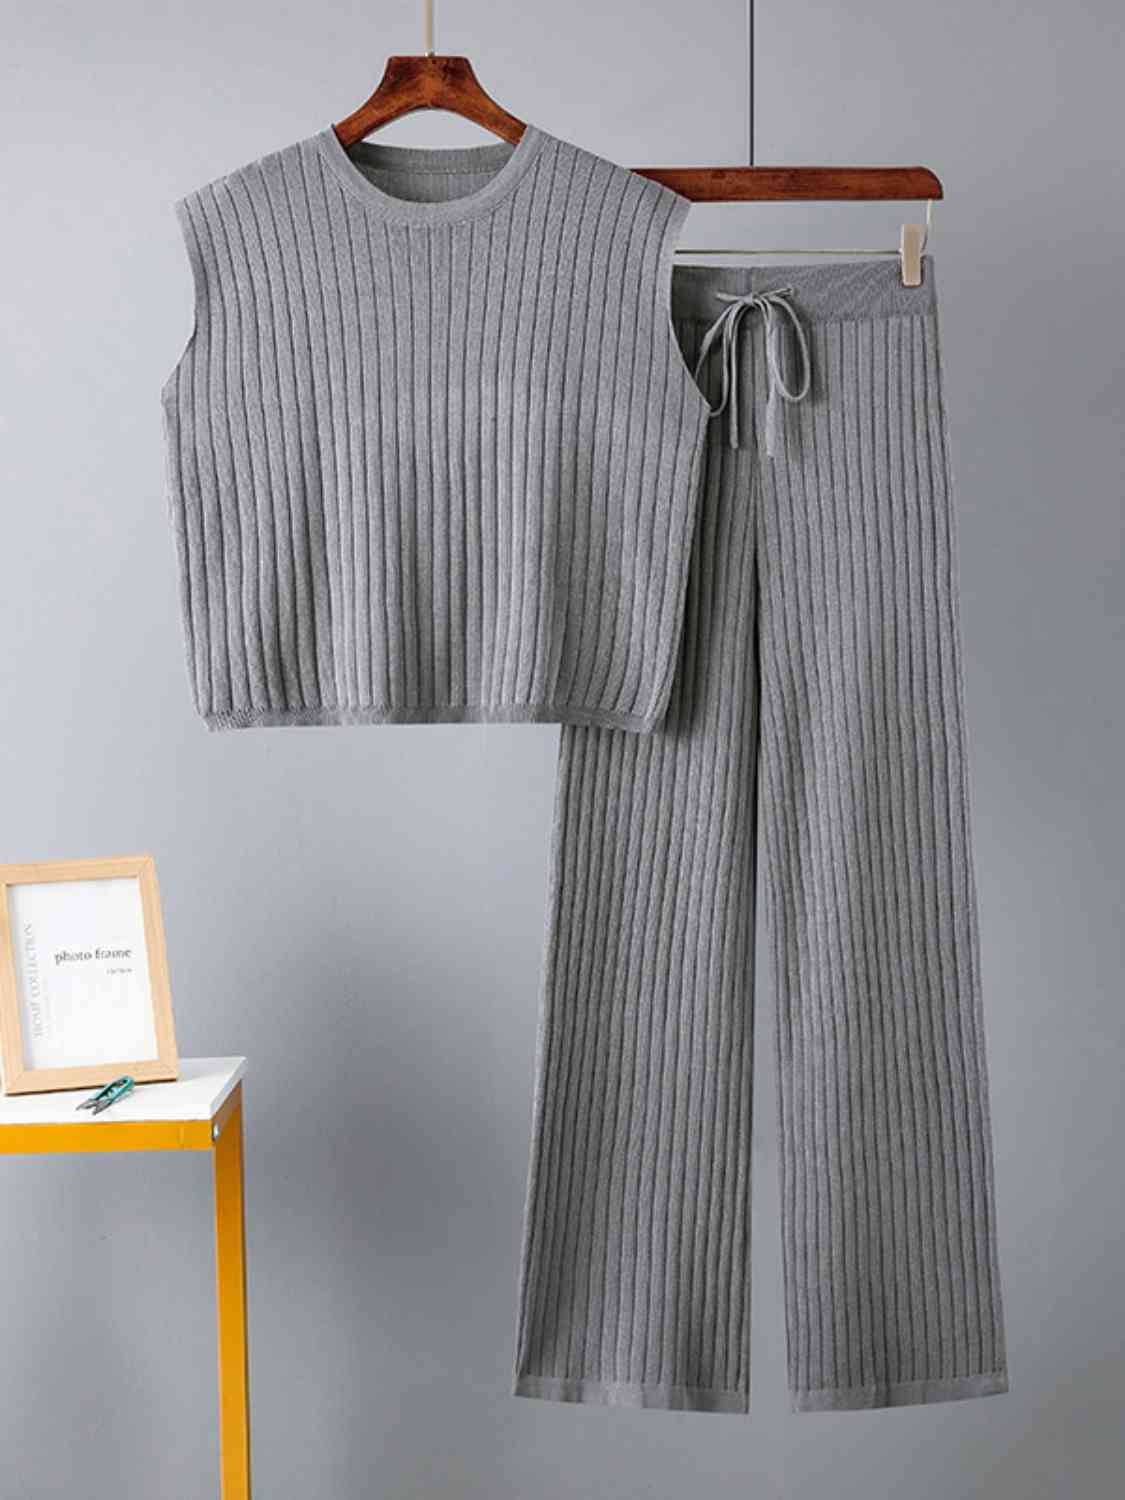 Women's Ribbed Sweater Vest and Drawstring Knit Pants Set